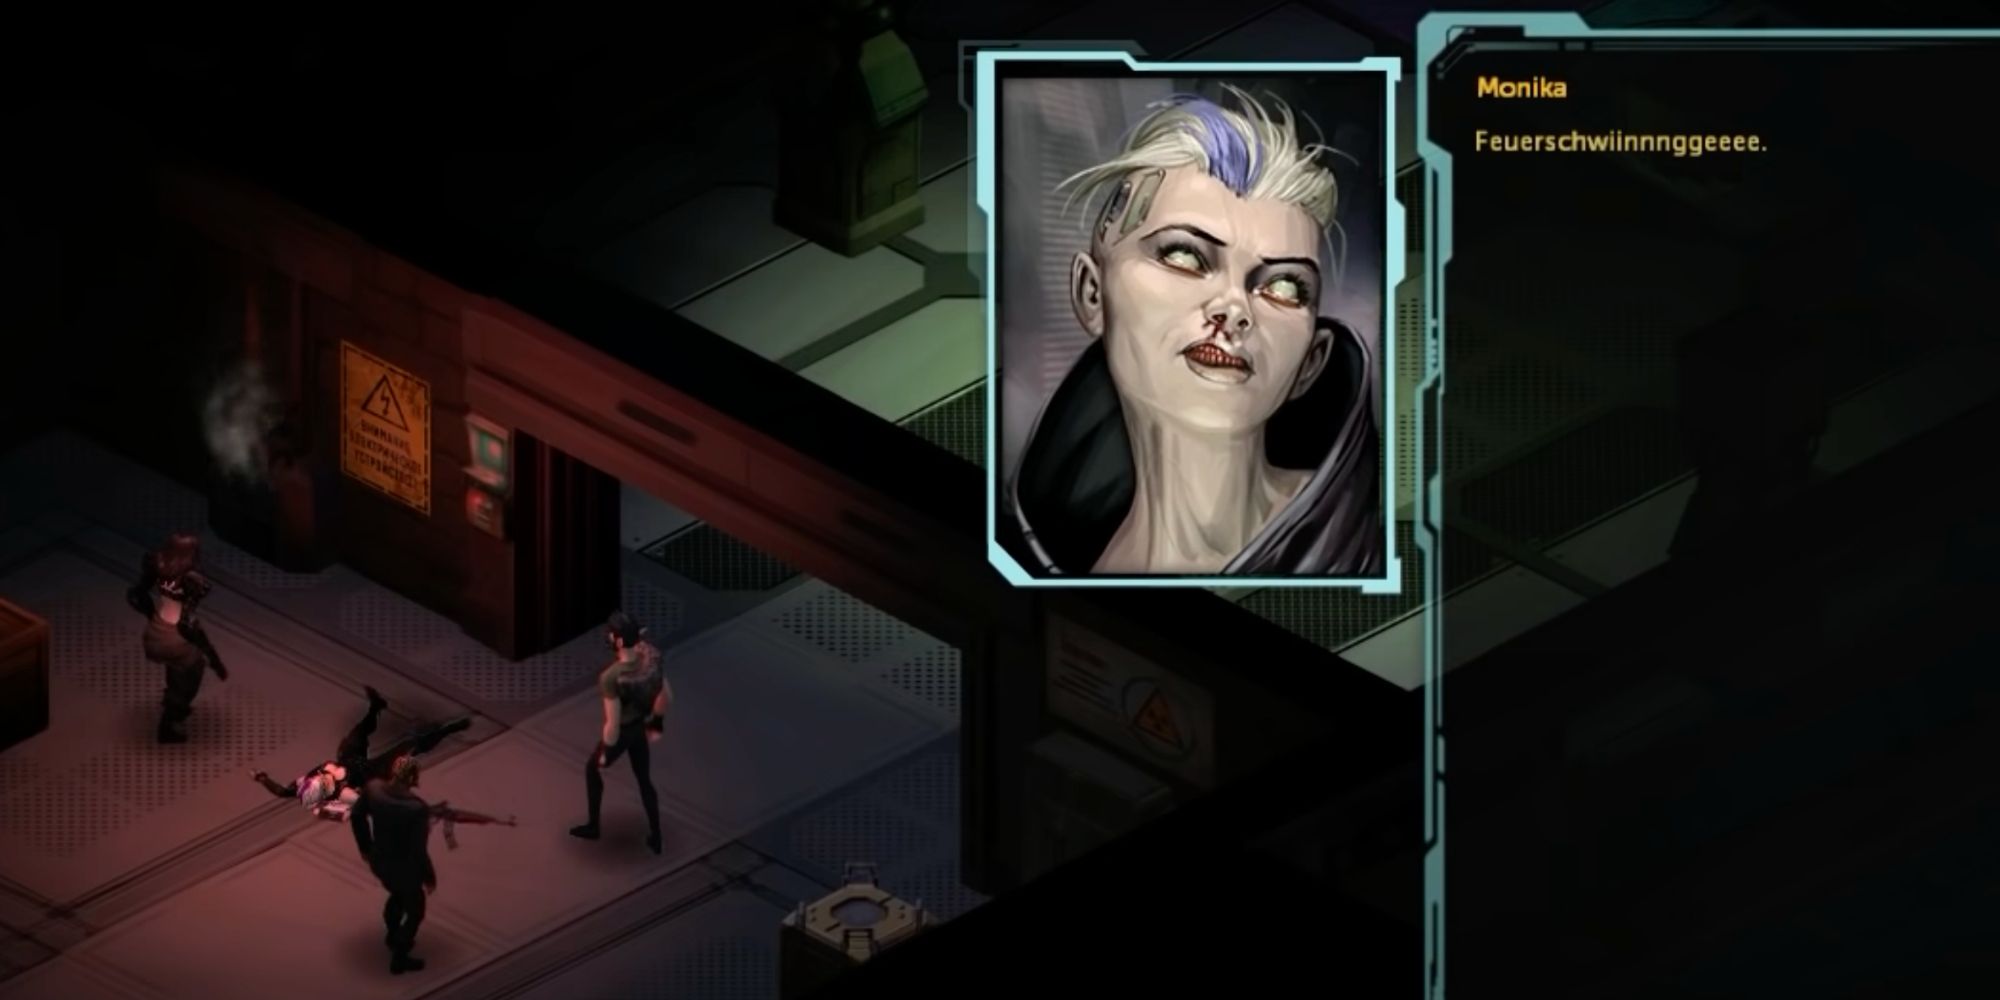 A screenshot from Shadowrun Dragonfall, showing Monika saying the word "Feuerschwinge" during her last moments alive